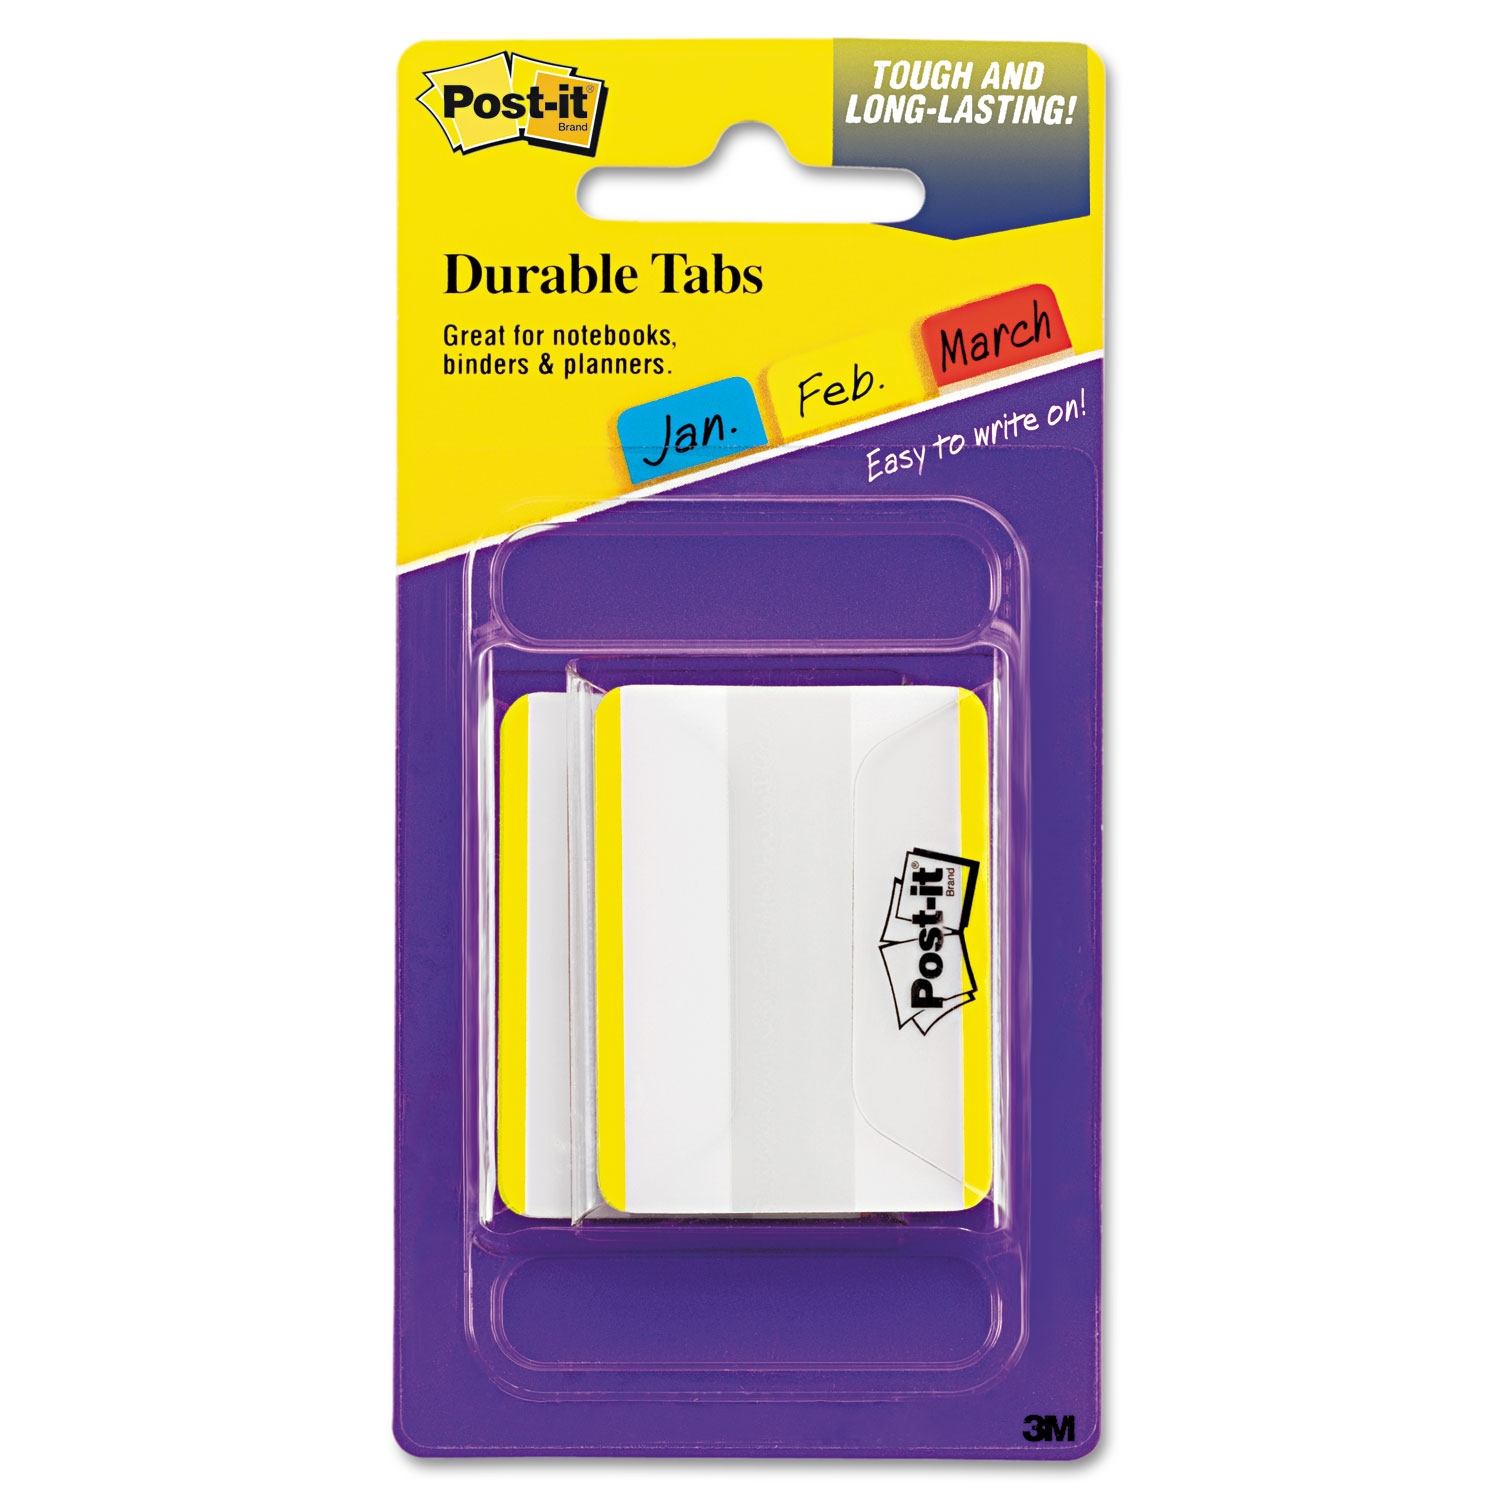 File Tabs, 2 x 1 1/2, Lined, Yellow, 50/Pack